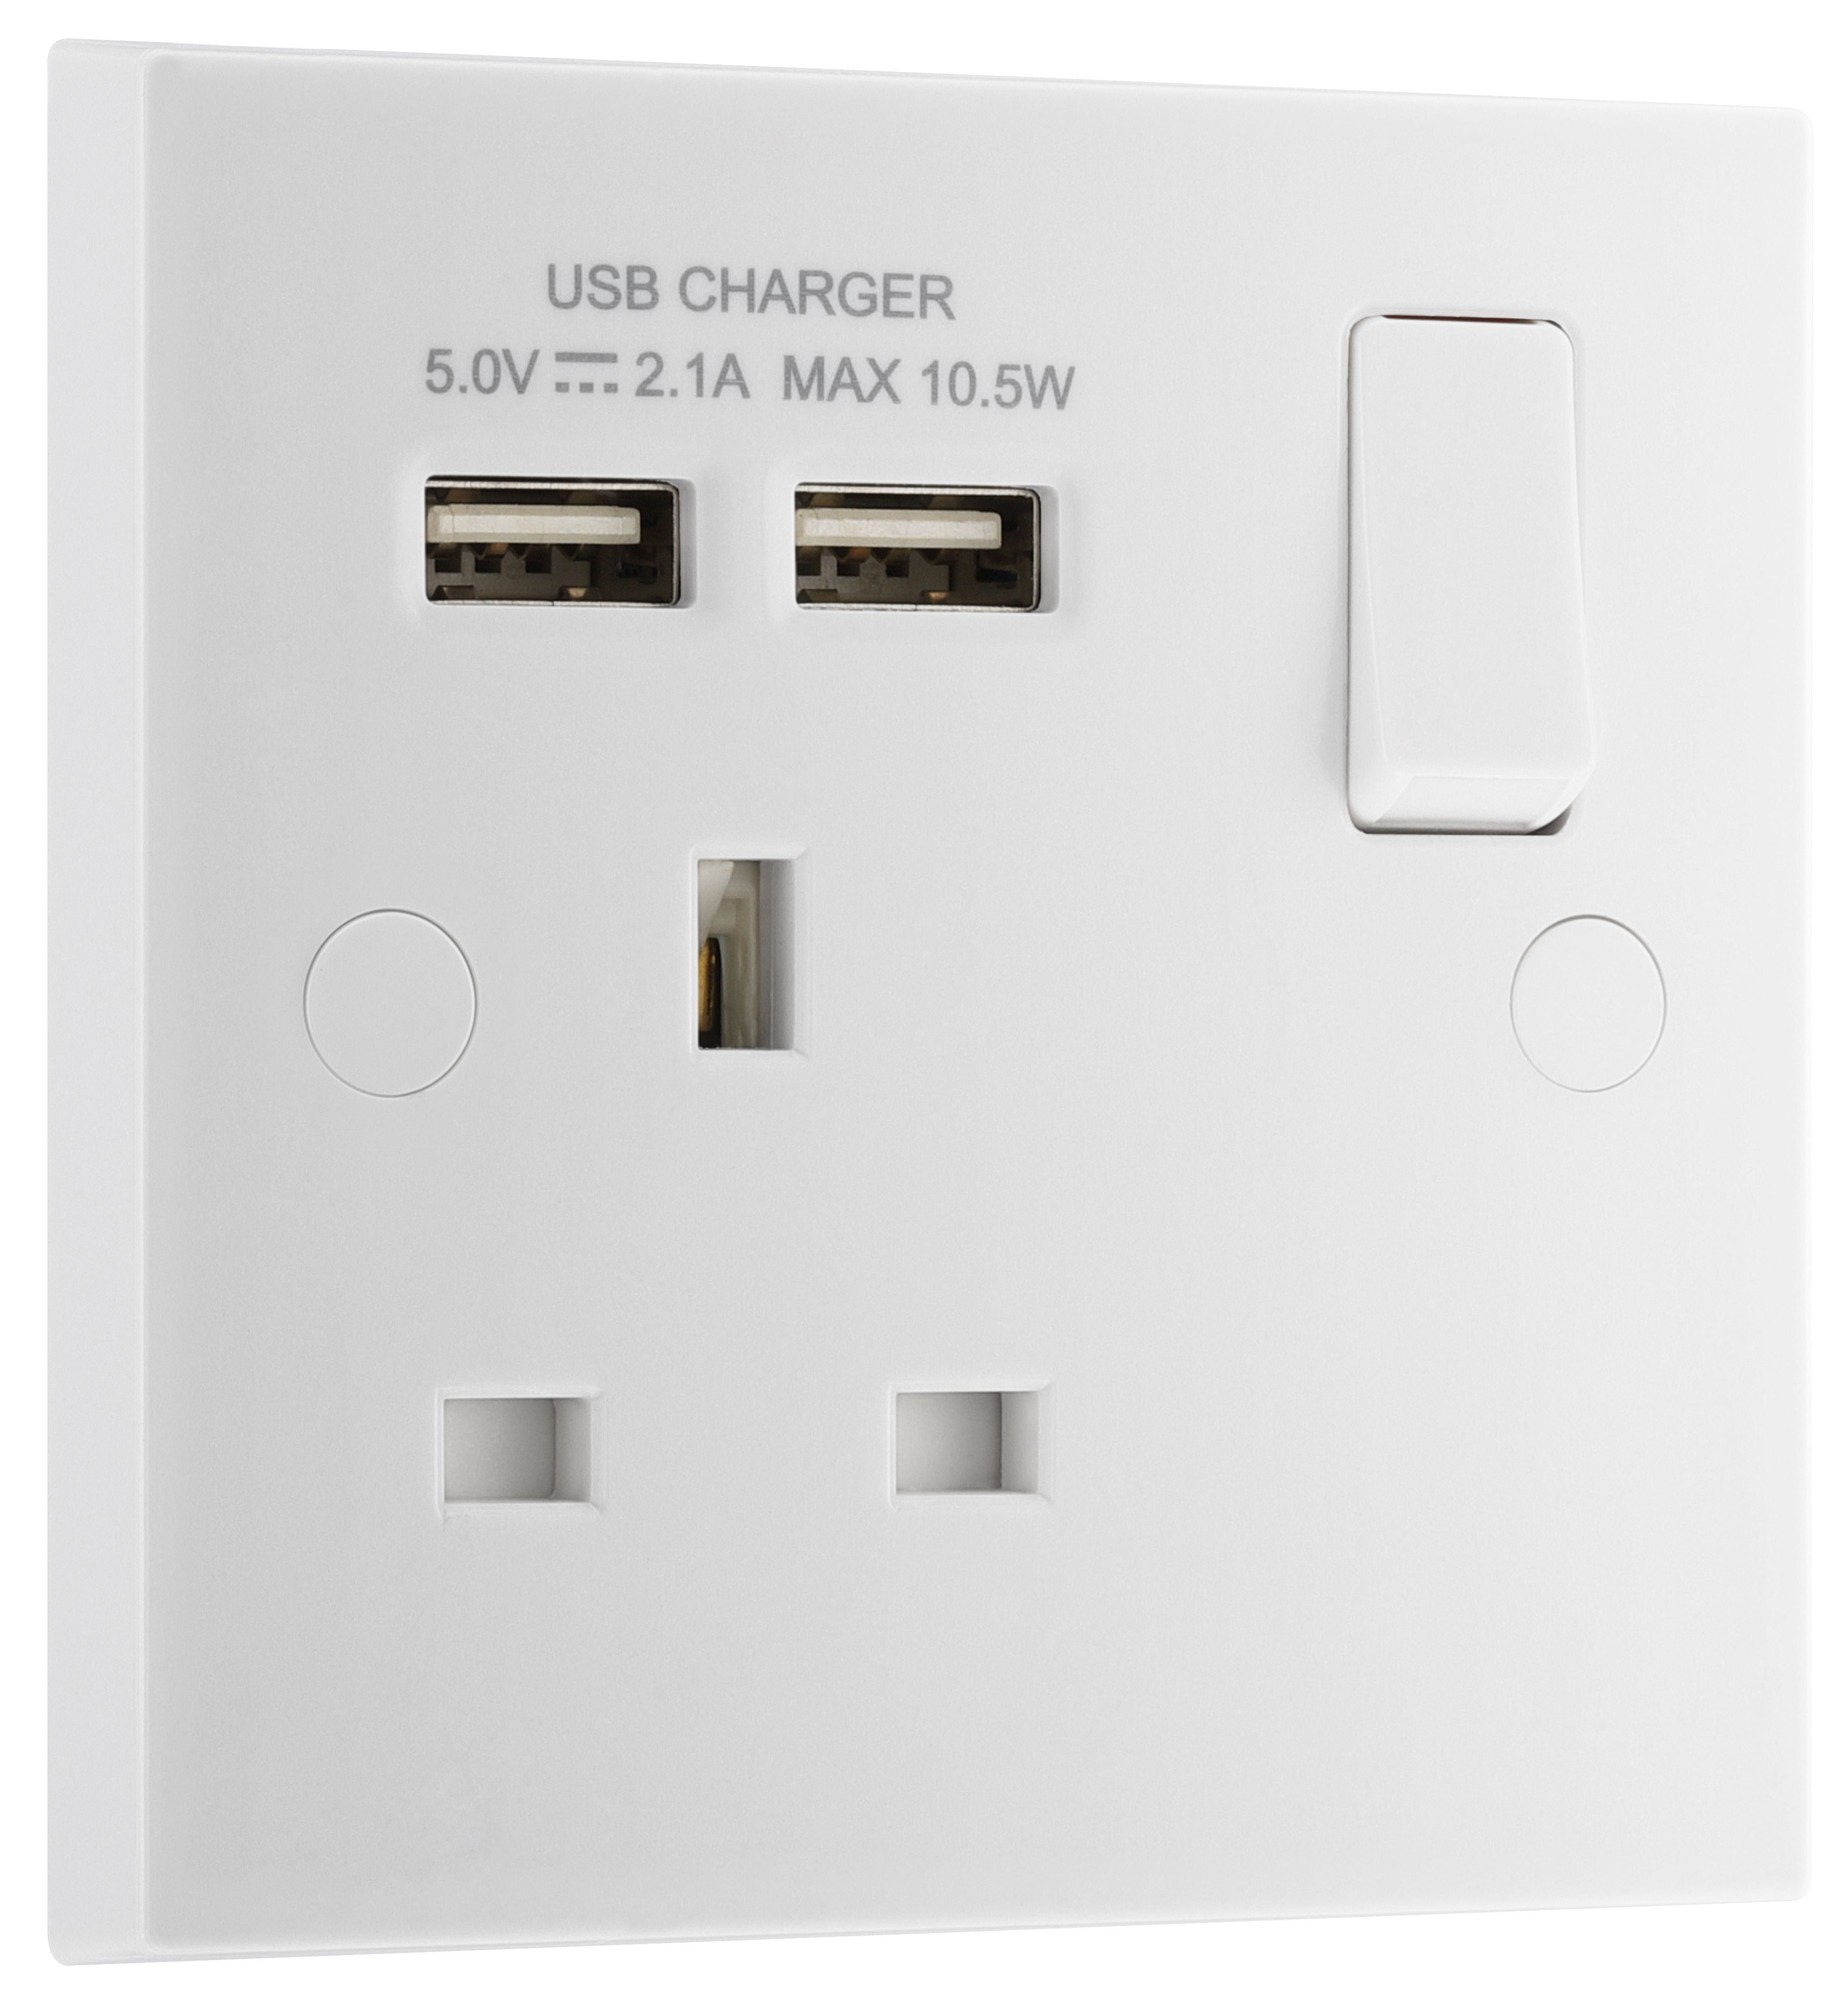 BG Single 13A Switched Gloss White Socket with USB x2 2.1A